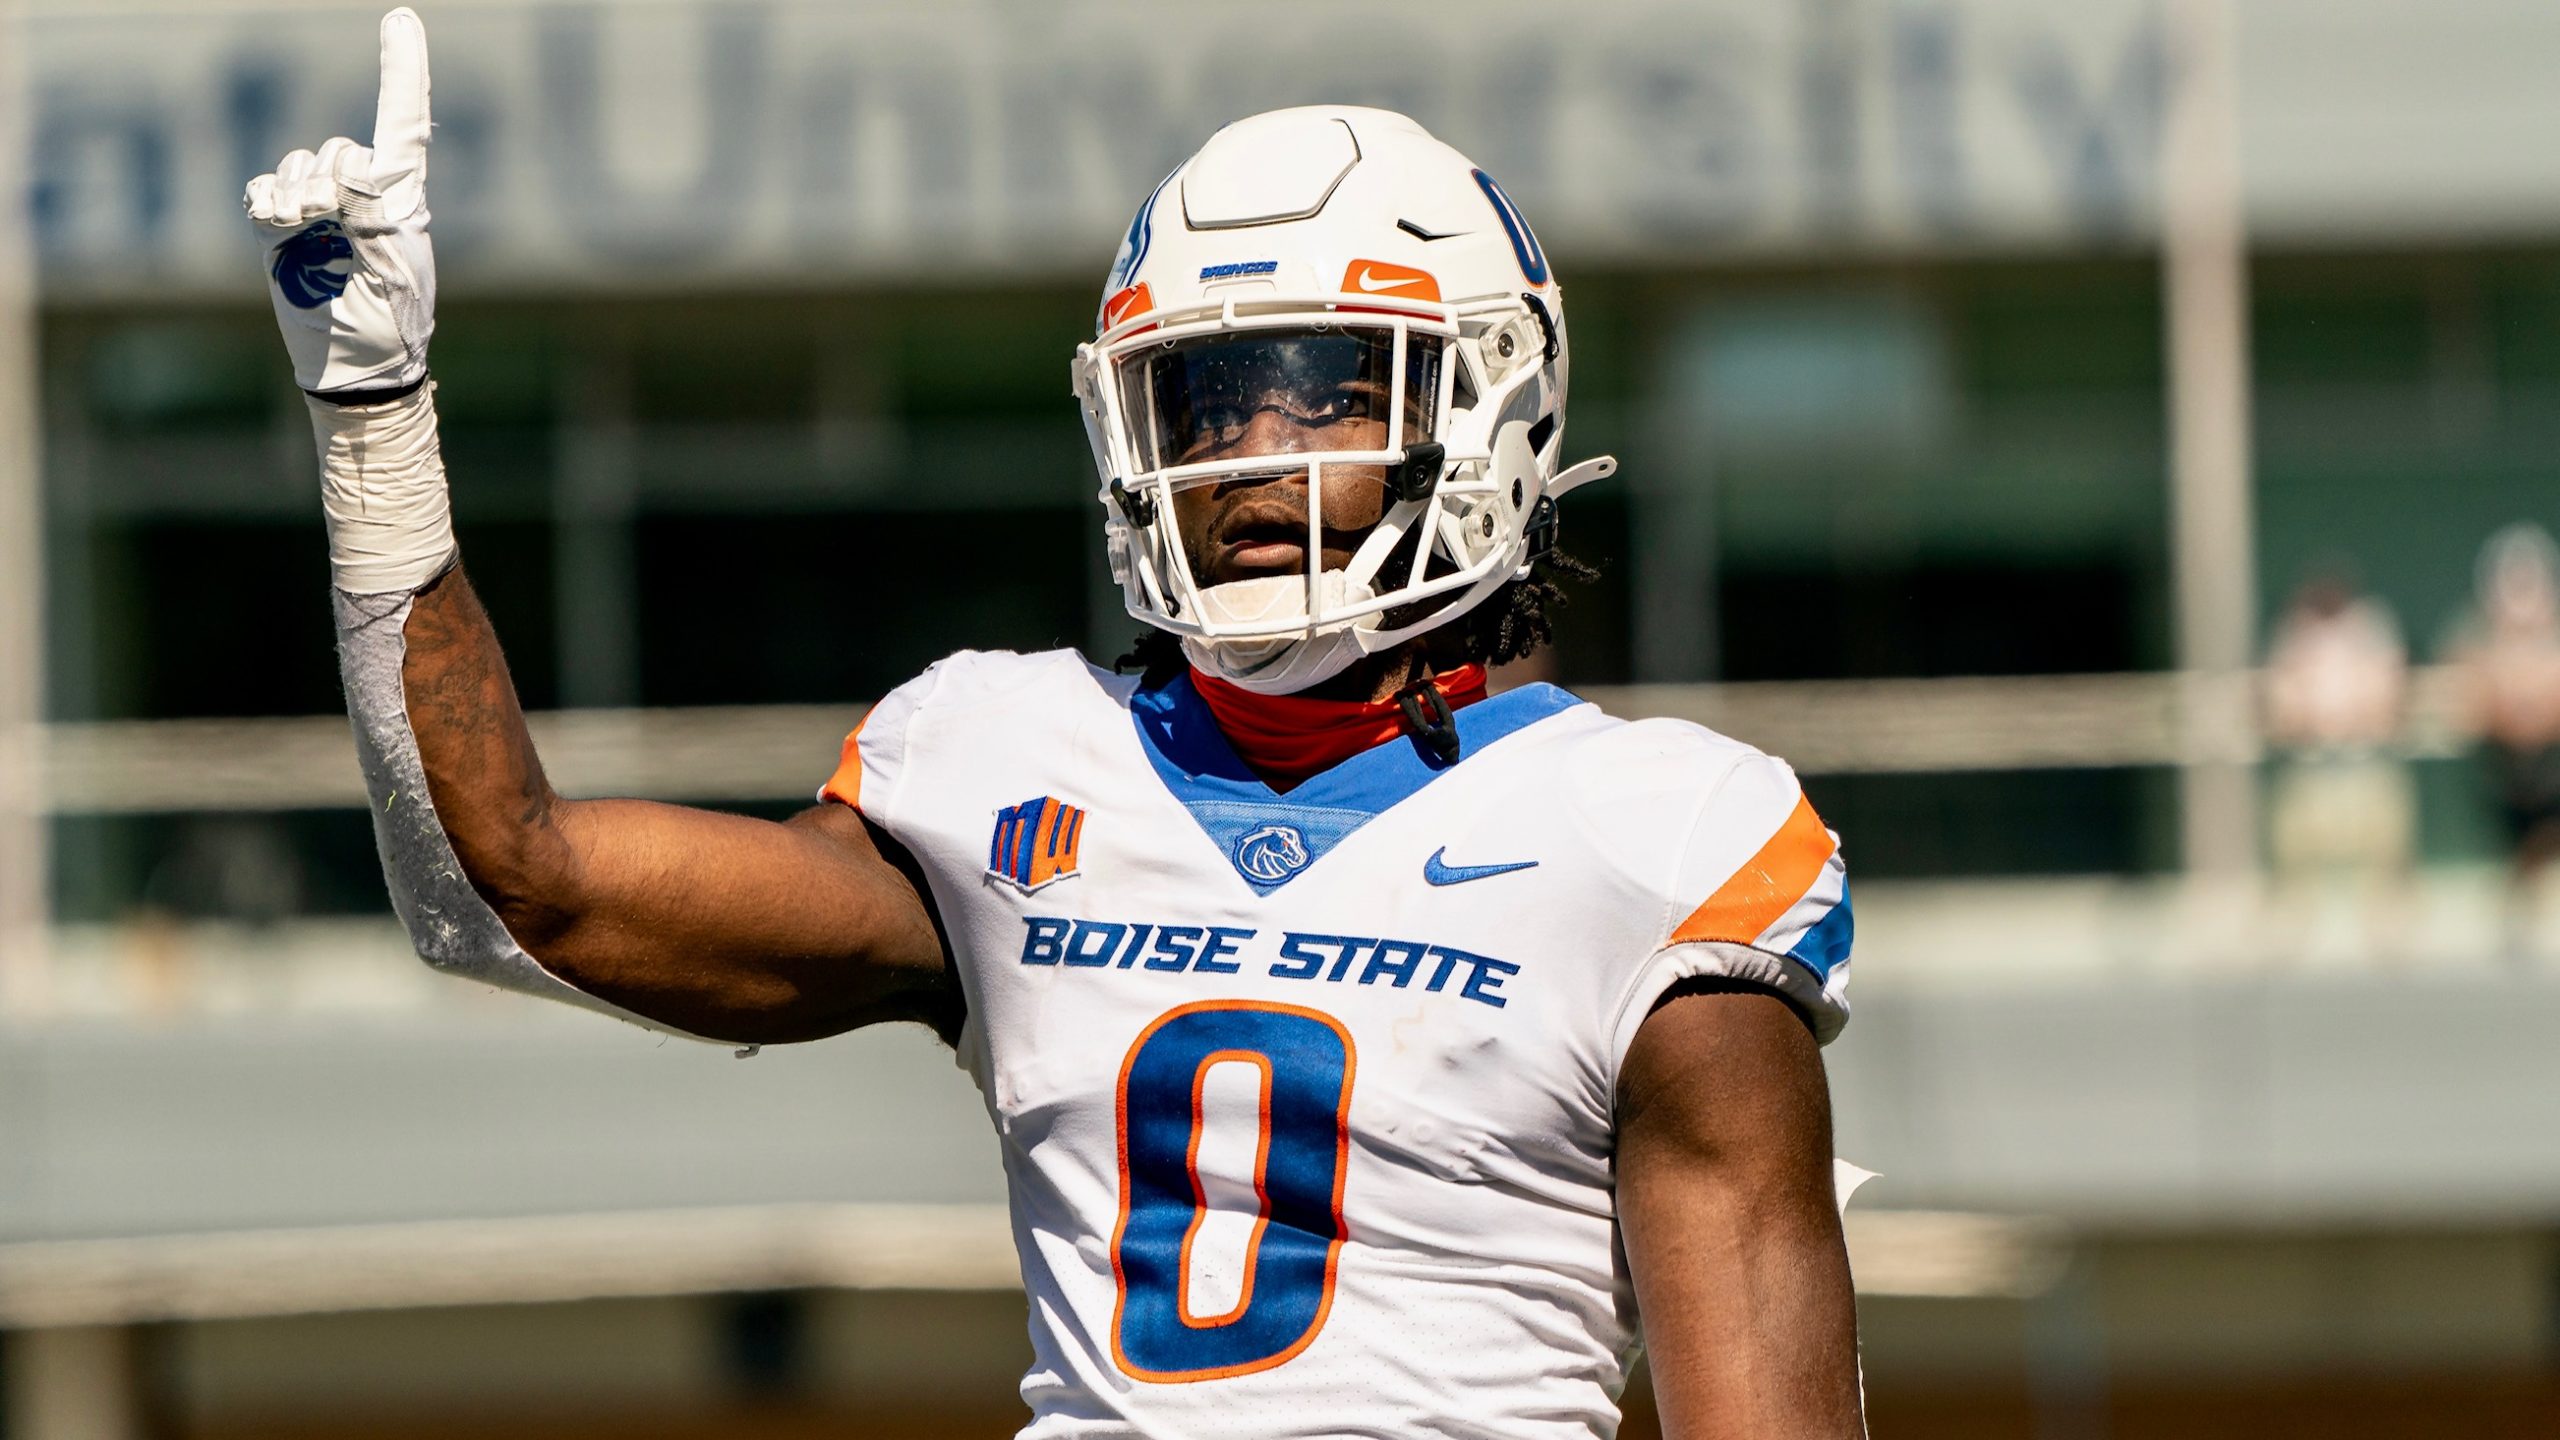 No. 3 on the BNN most important players list for Boise State football